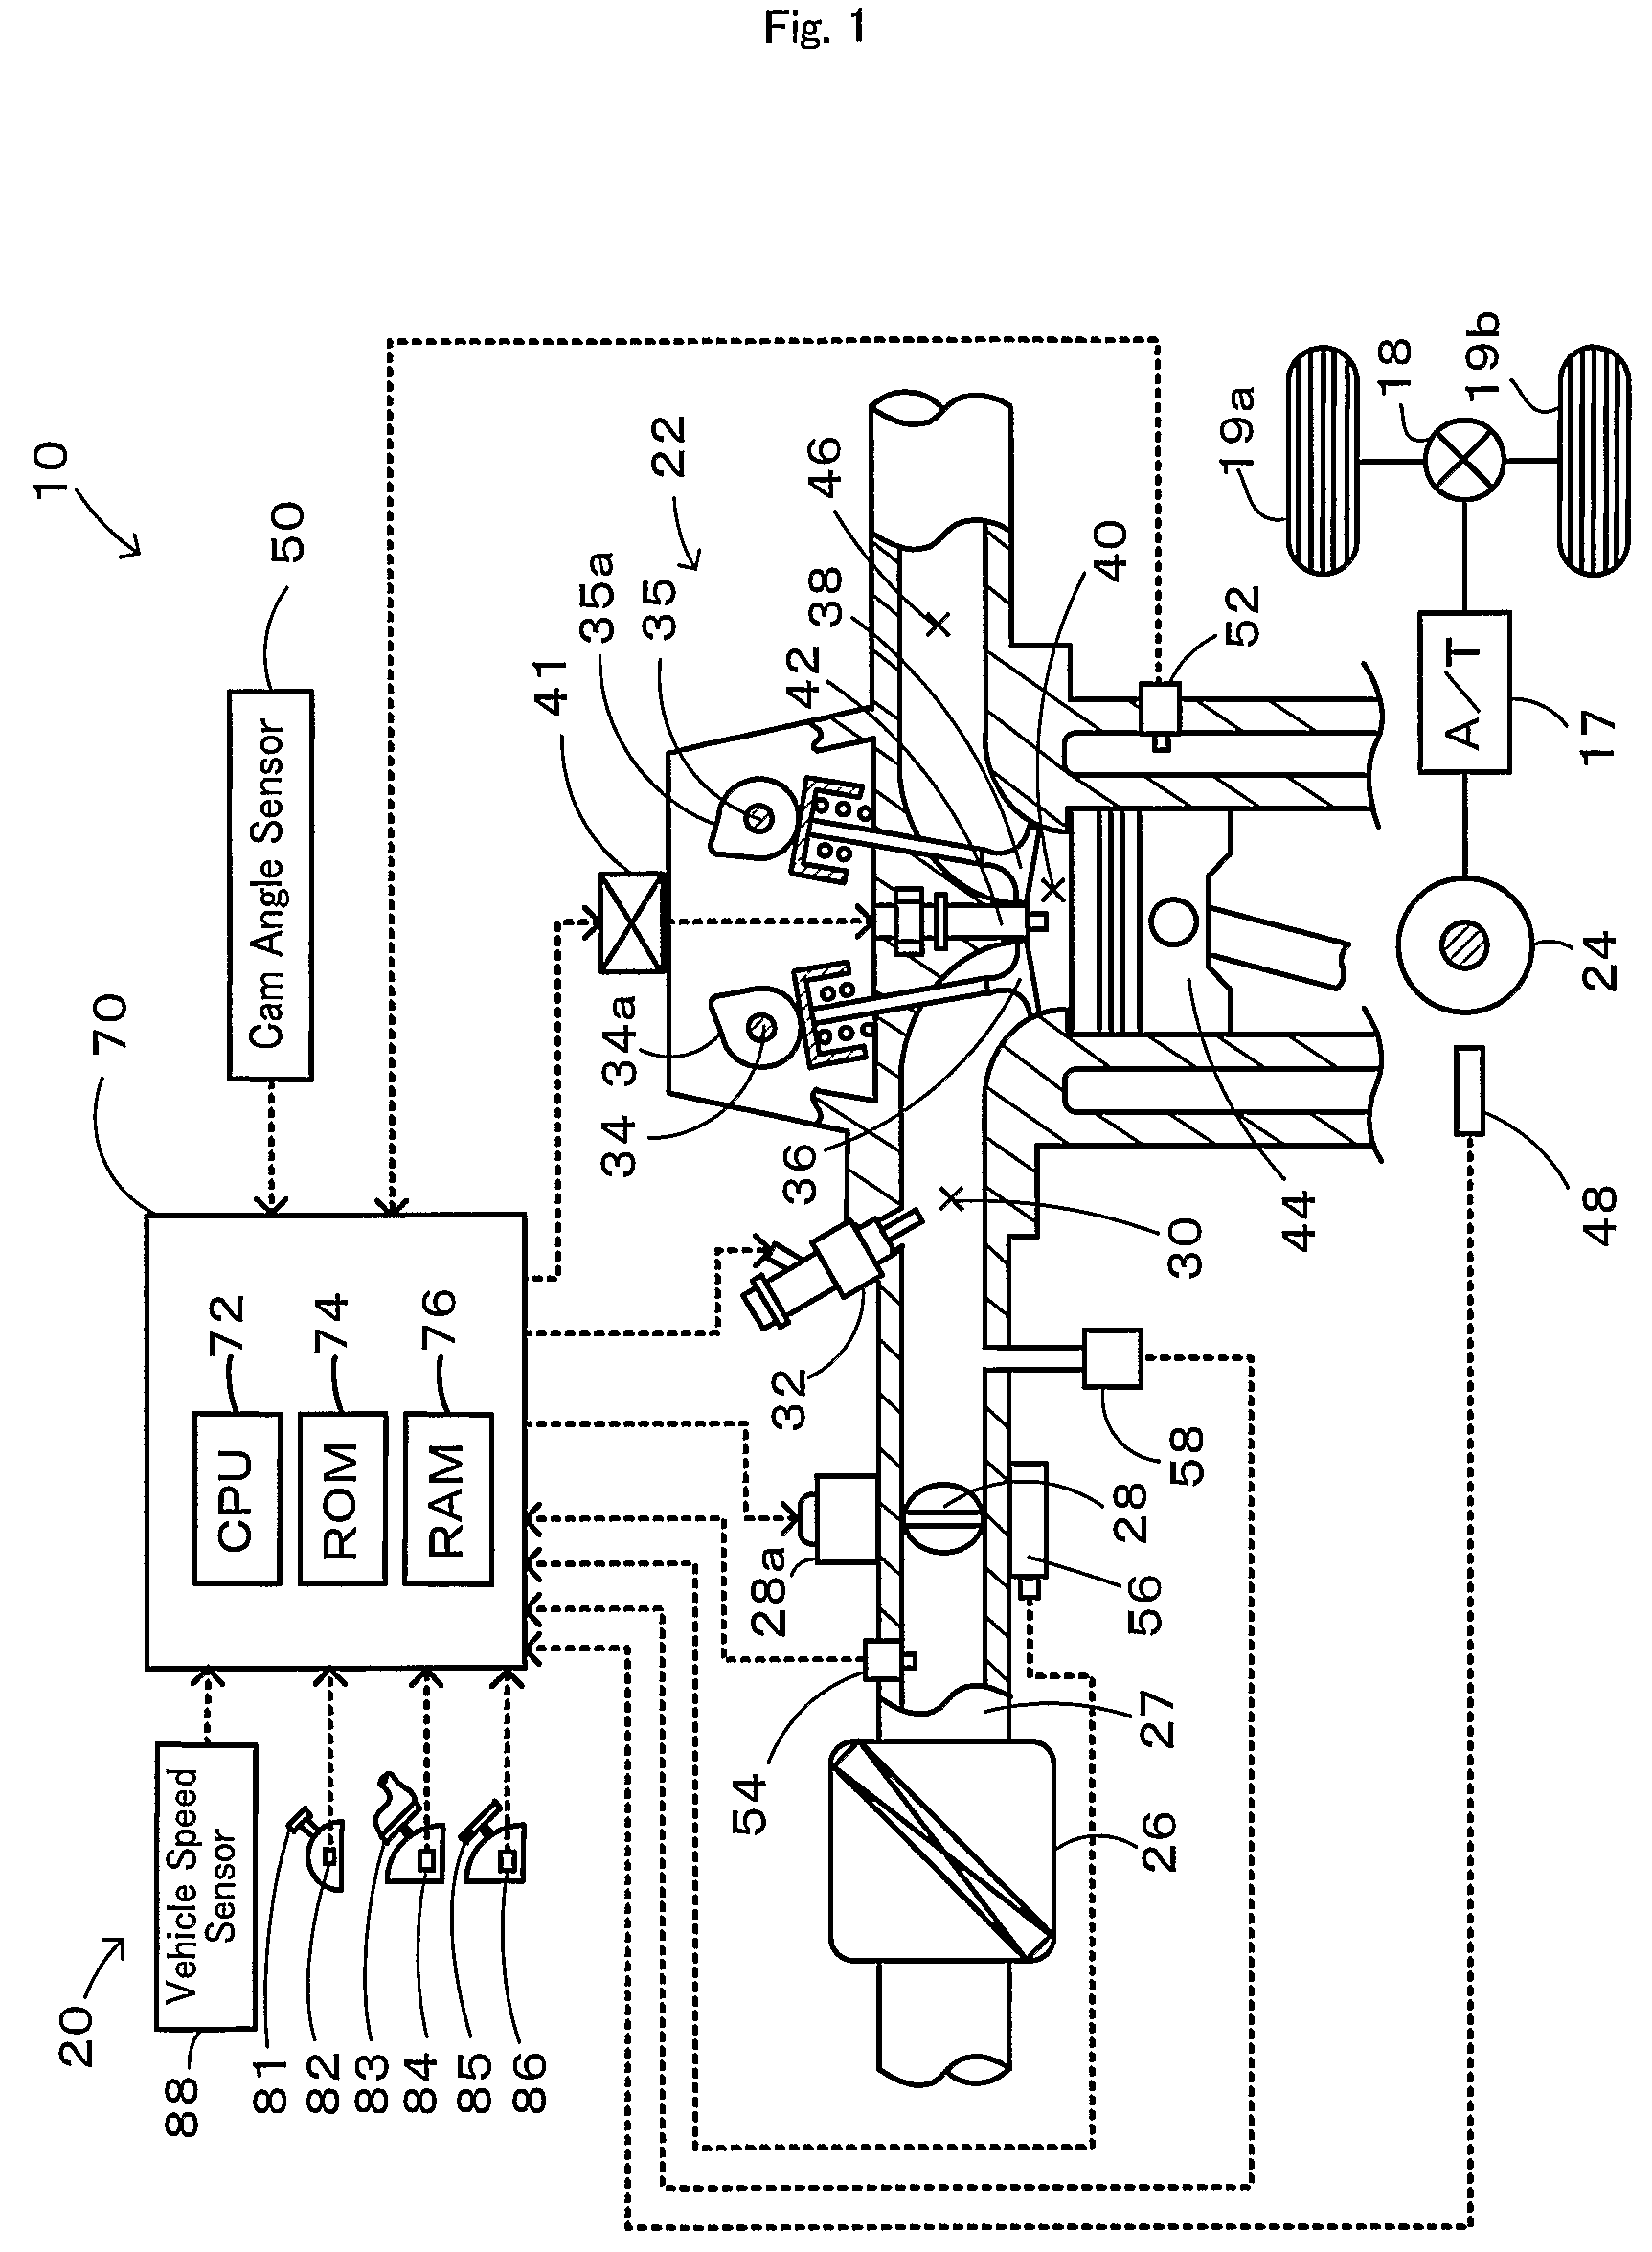 Internal combustion engine system and internal combustion engine control method